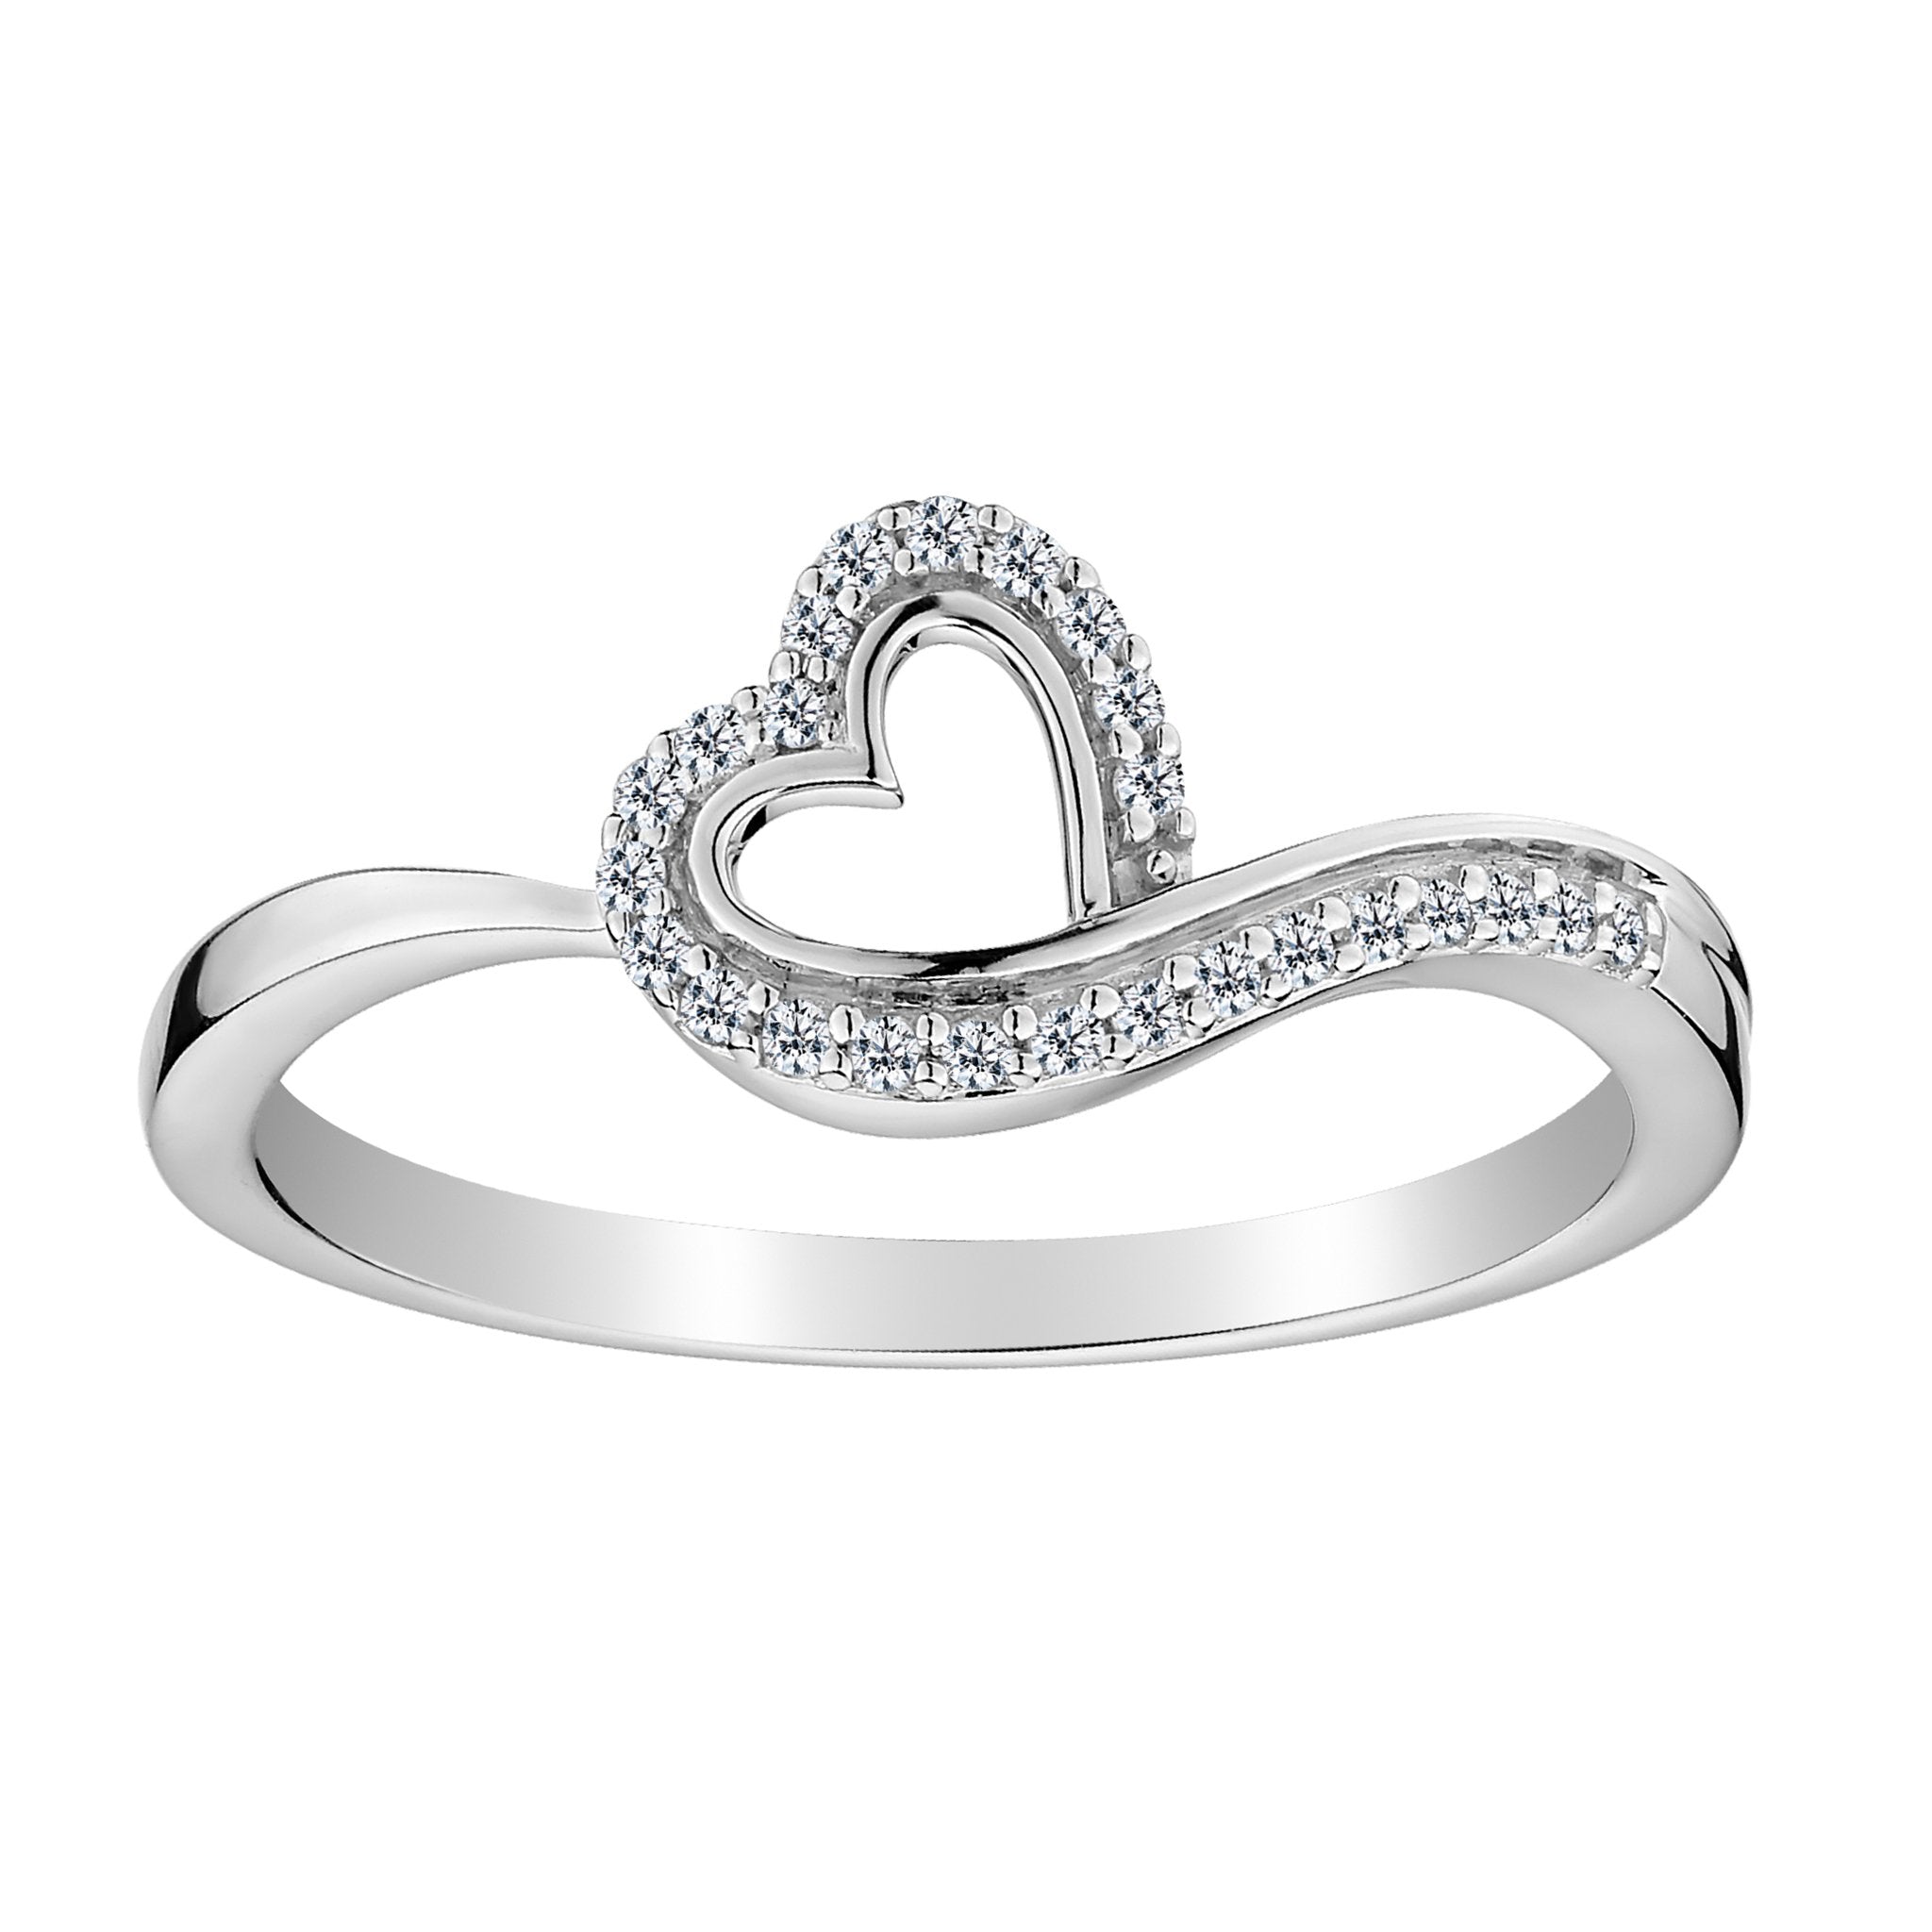 .10 CARAT DIAMOND HEART RING, 10kt WHITE GOLD. Fashion Rings - Griffin Jewellery Designs